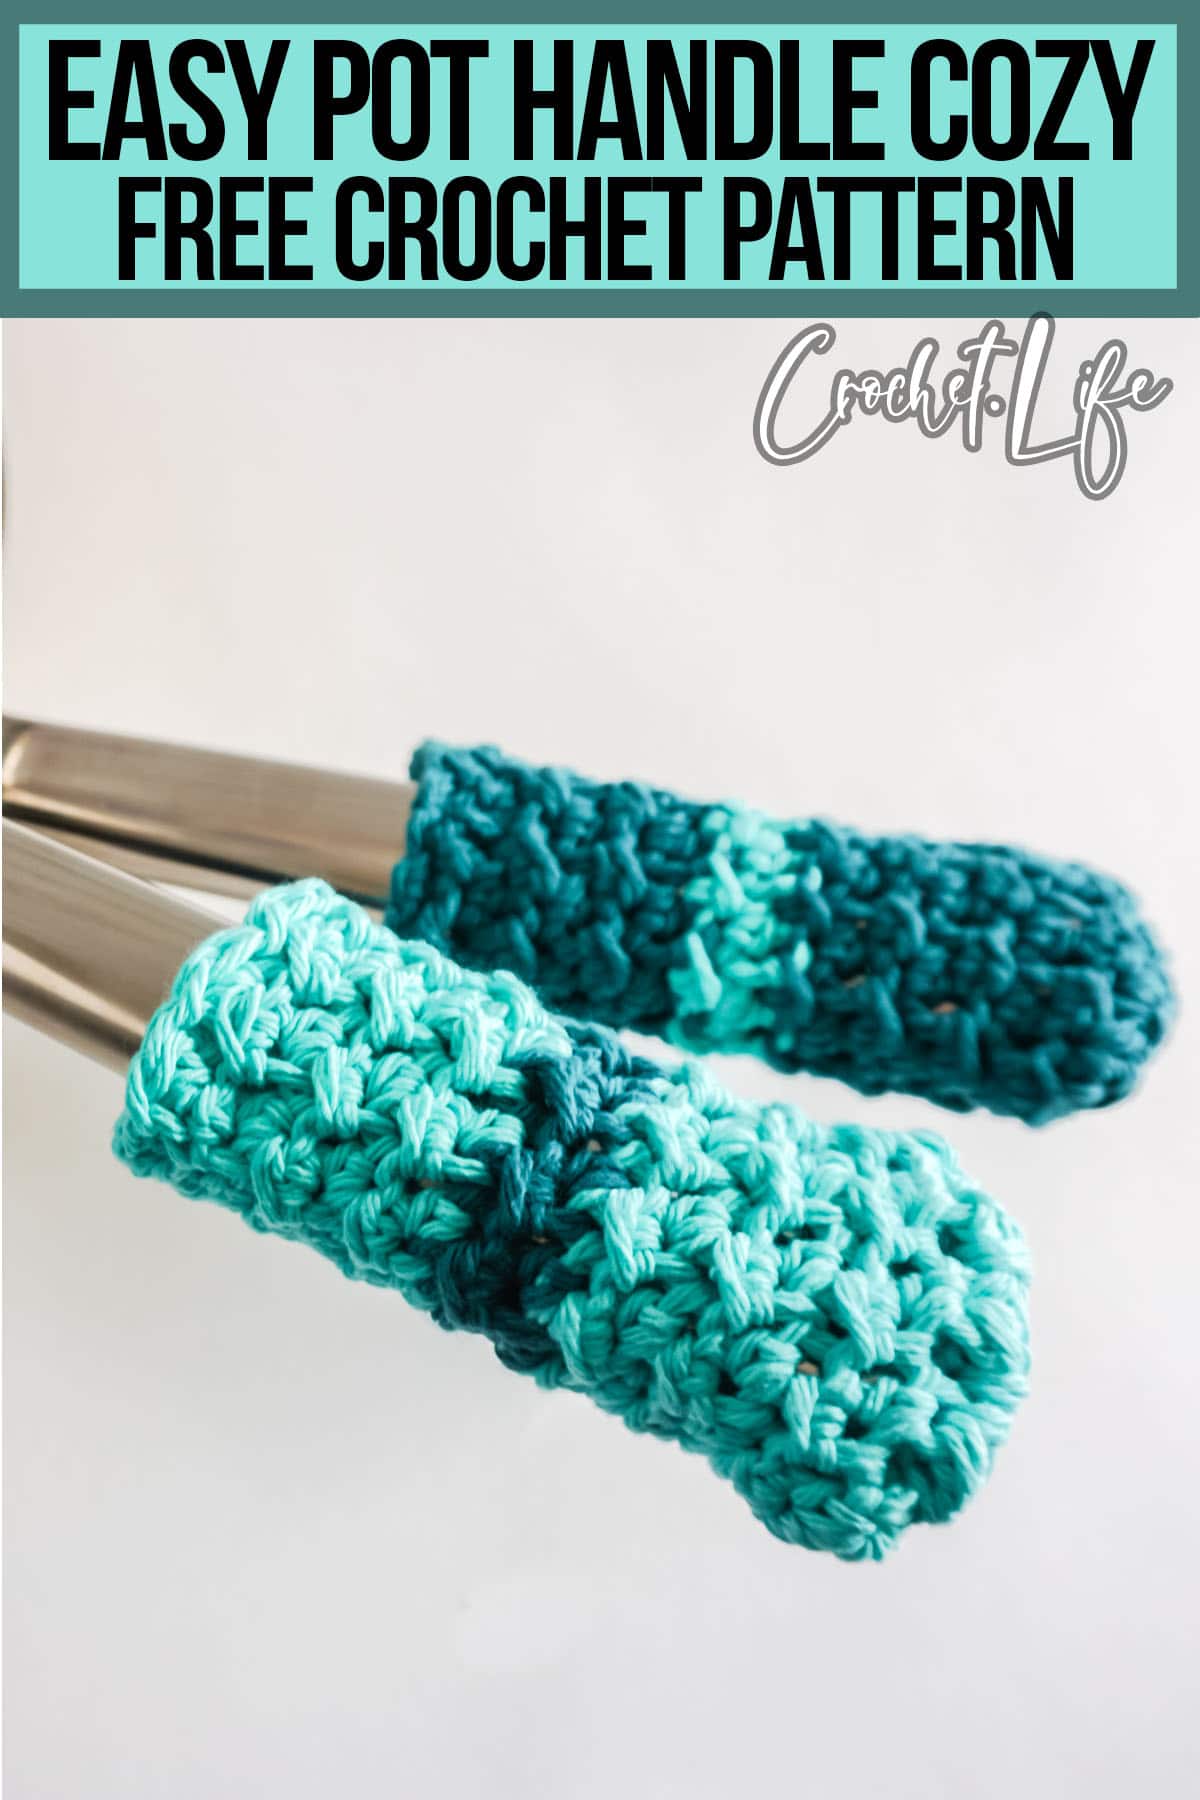 crochet pattern for pot handle protector with text which reads pot holder cozy free crochet pattern